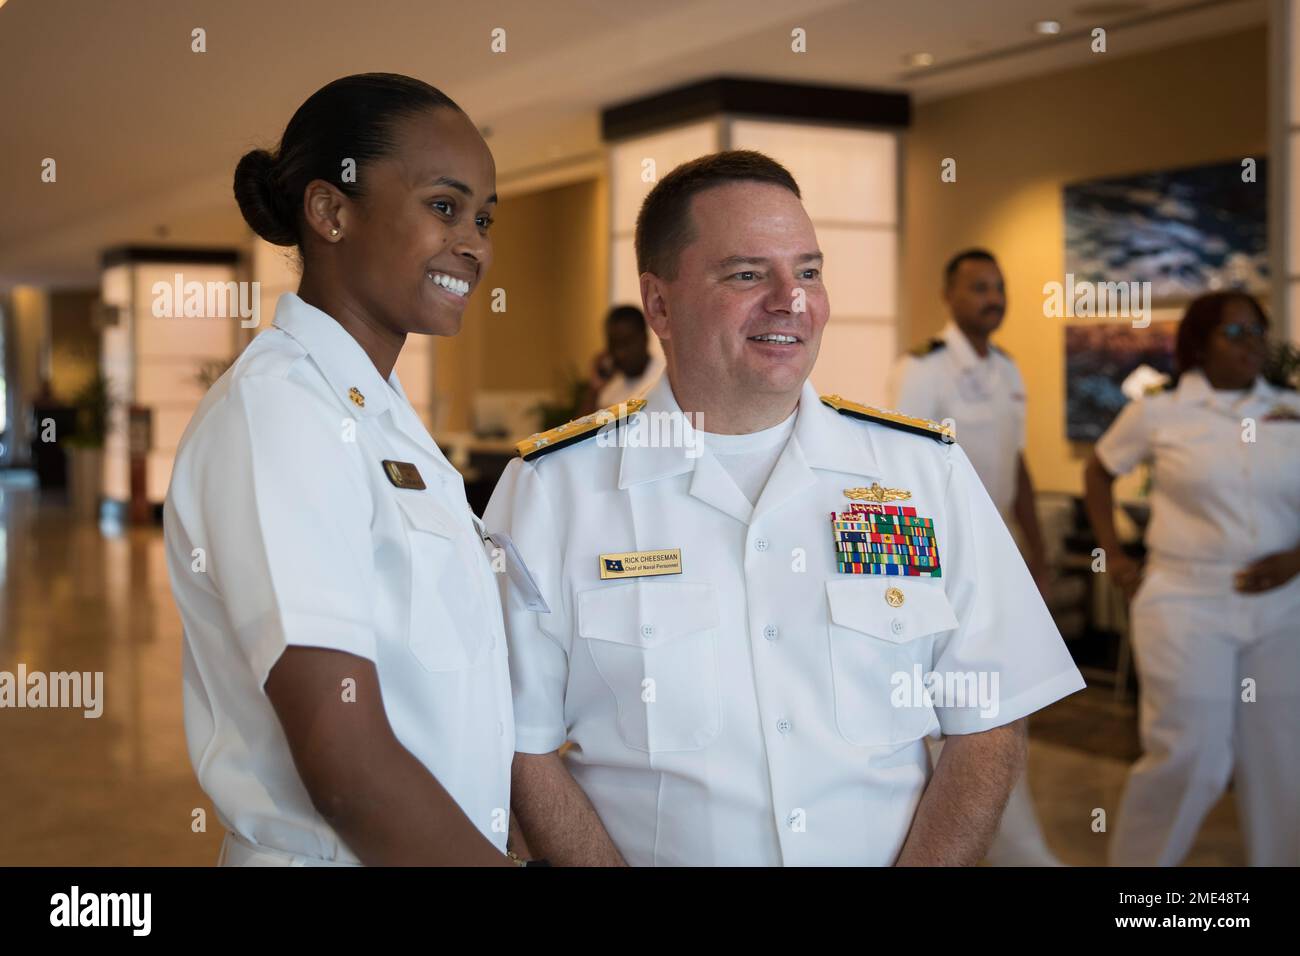 220727-N-TH560-0343 ANNAPOLIS, Md. (July 27, 2022) – Chief of Naval Personnel Vice Adm. Rick Cheeseman poses for a photo with a Sailor at the National Naval Officers Association (NNOA) 50th Year Symposium, July 27, 2022. The annual NNOA conference aims to increase attendees’ overall awareness of issues affecting the sea service while hosting educational and professional development workshops, seminars, and exhibits. Stock Photo